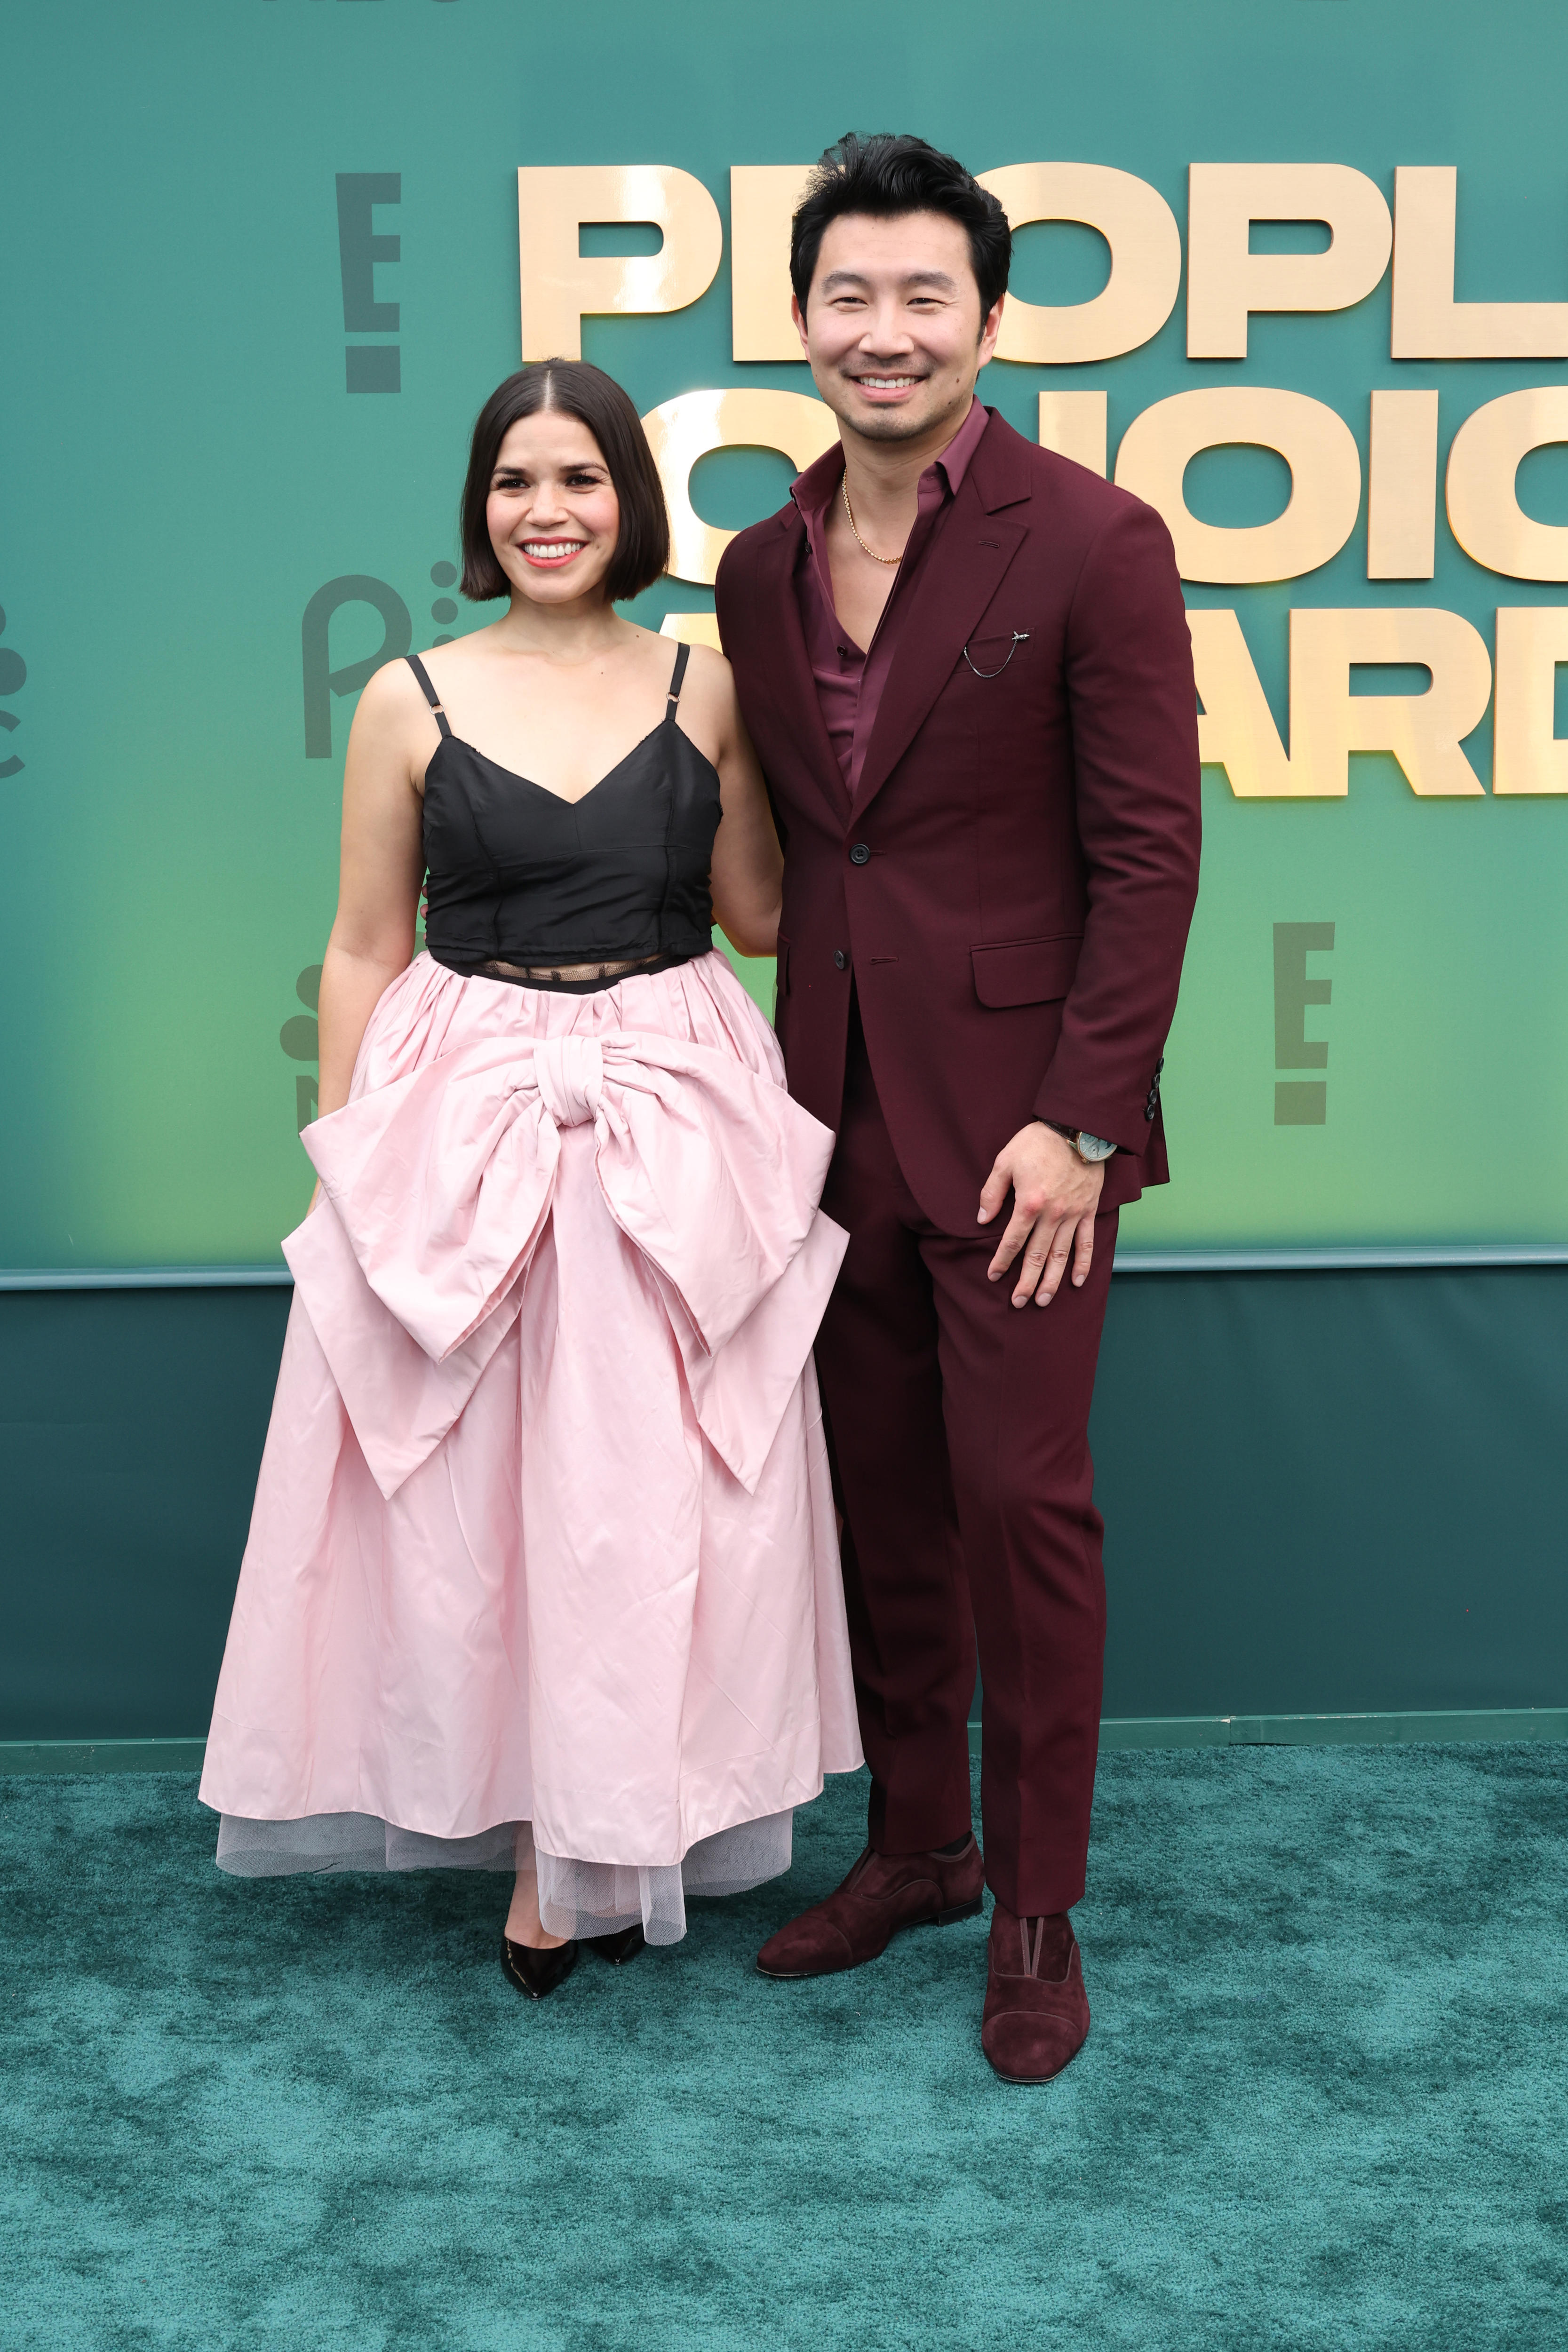 An actress in a black and pink gown standing next to an actor in a maroon suit on the red carpet